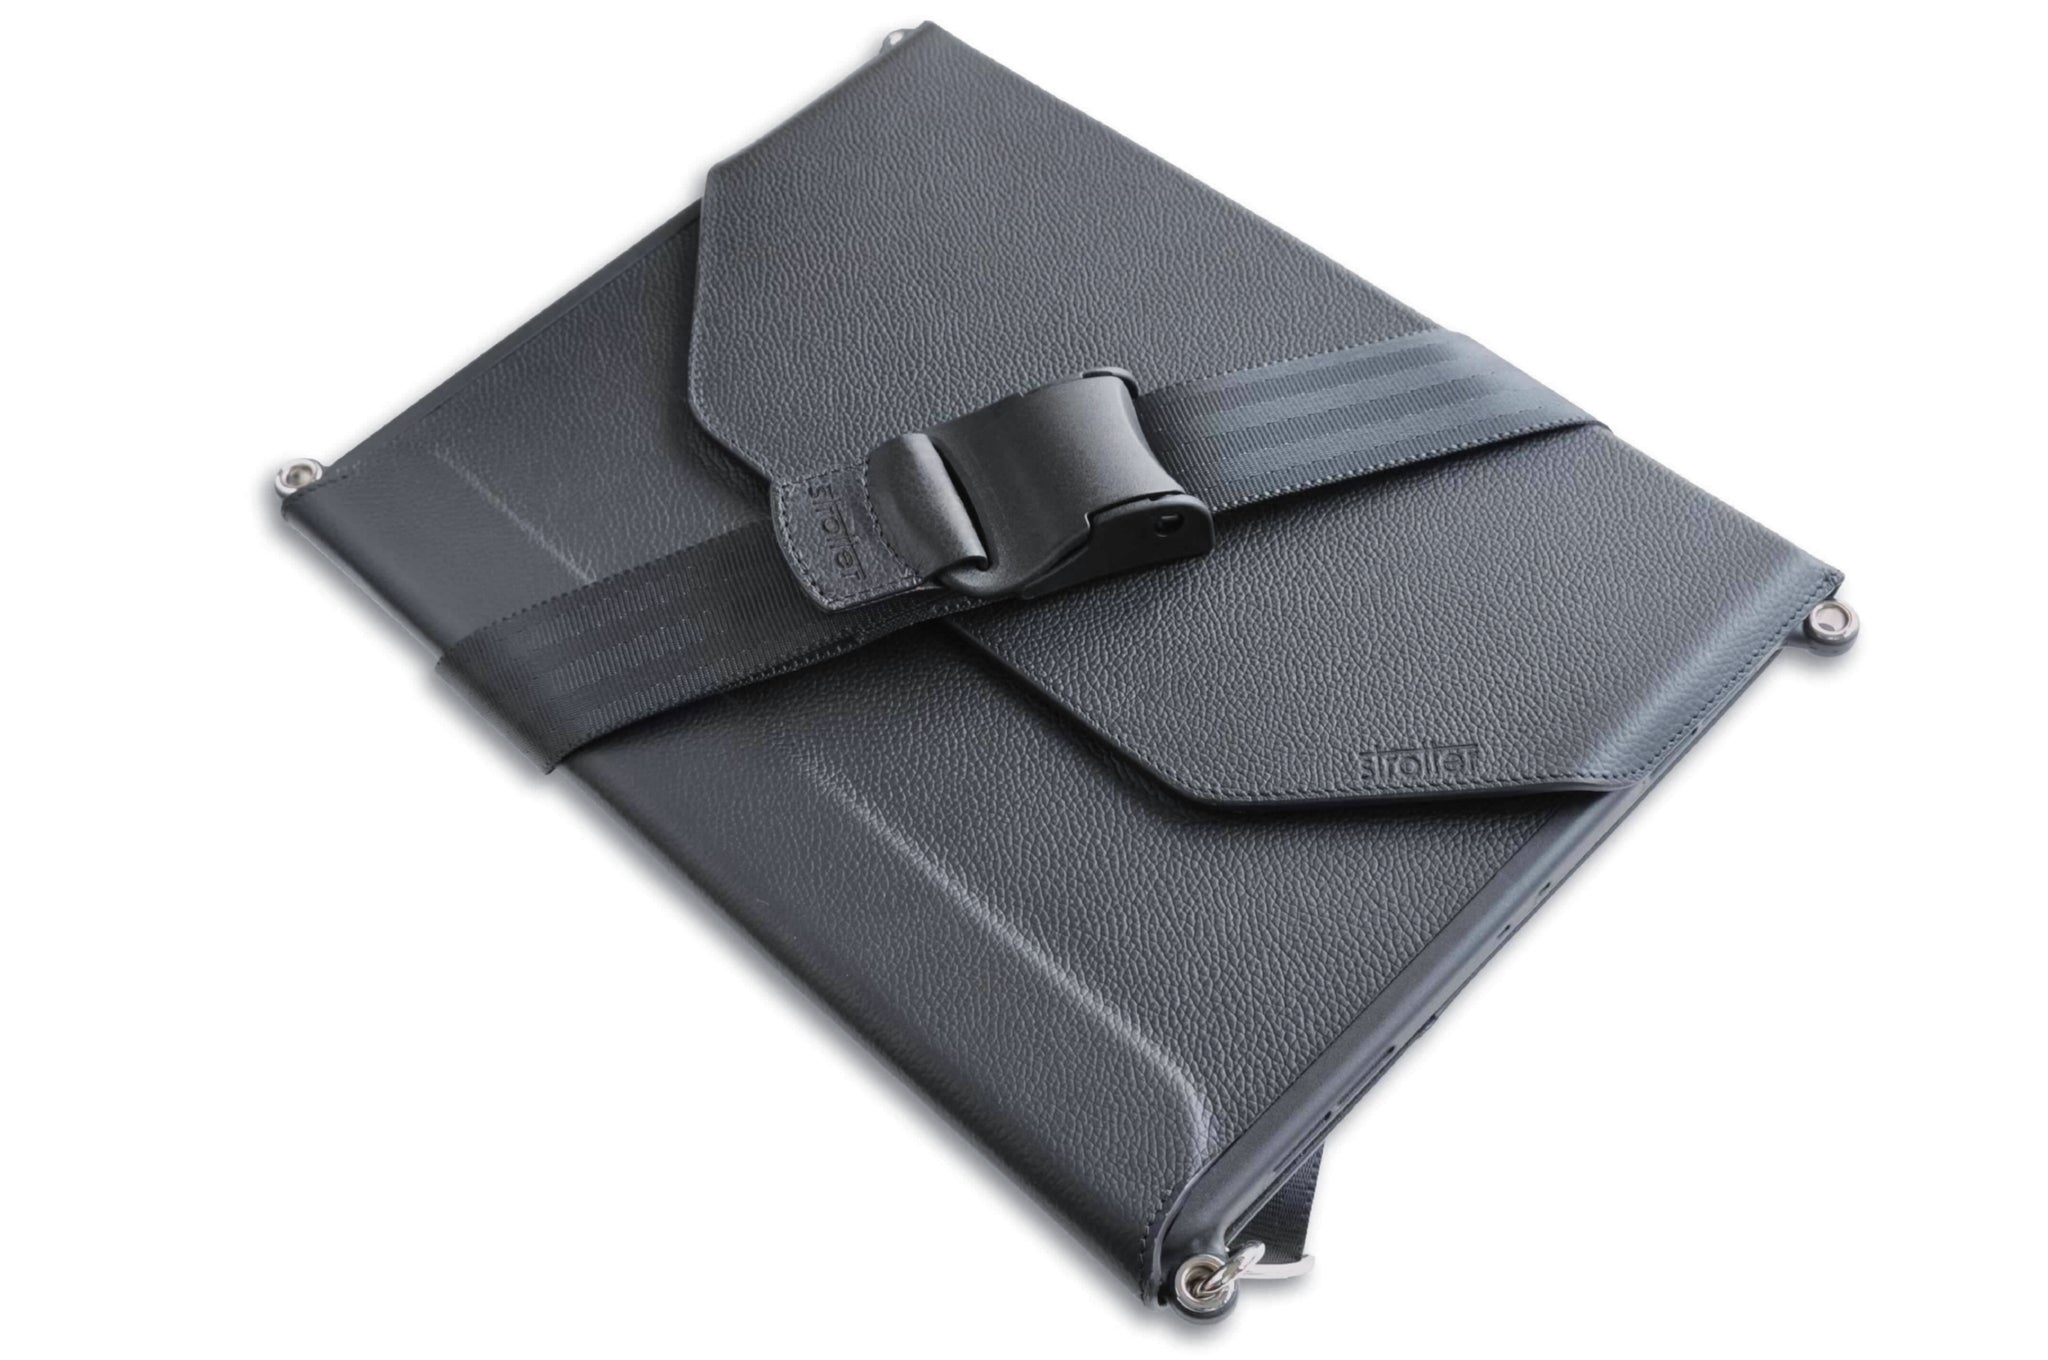 3rd generation iPad Pro 12.9” 2018 carrying case with shoulder strap by Strotter.